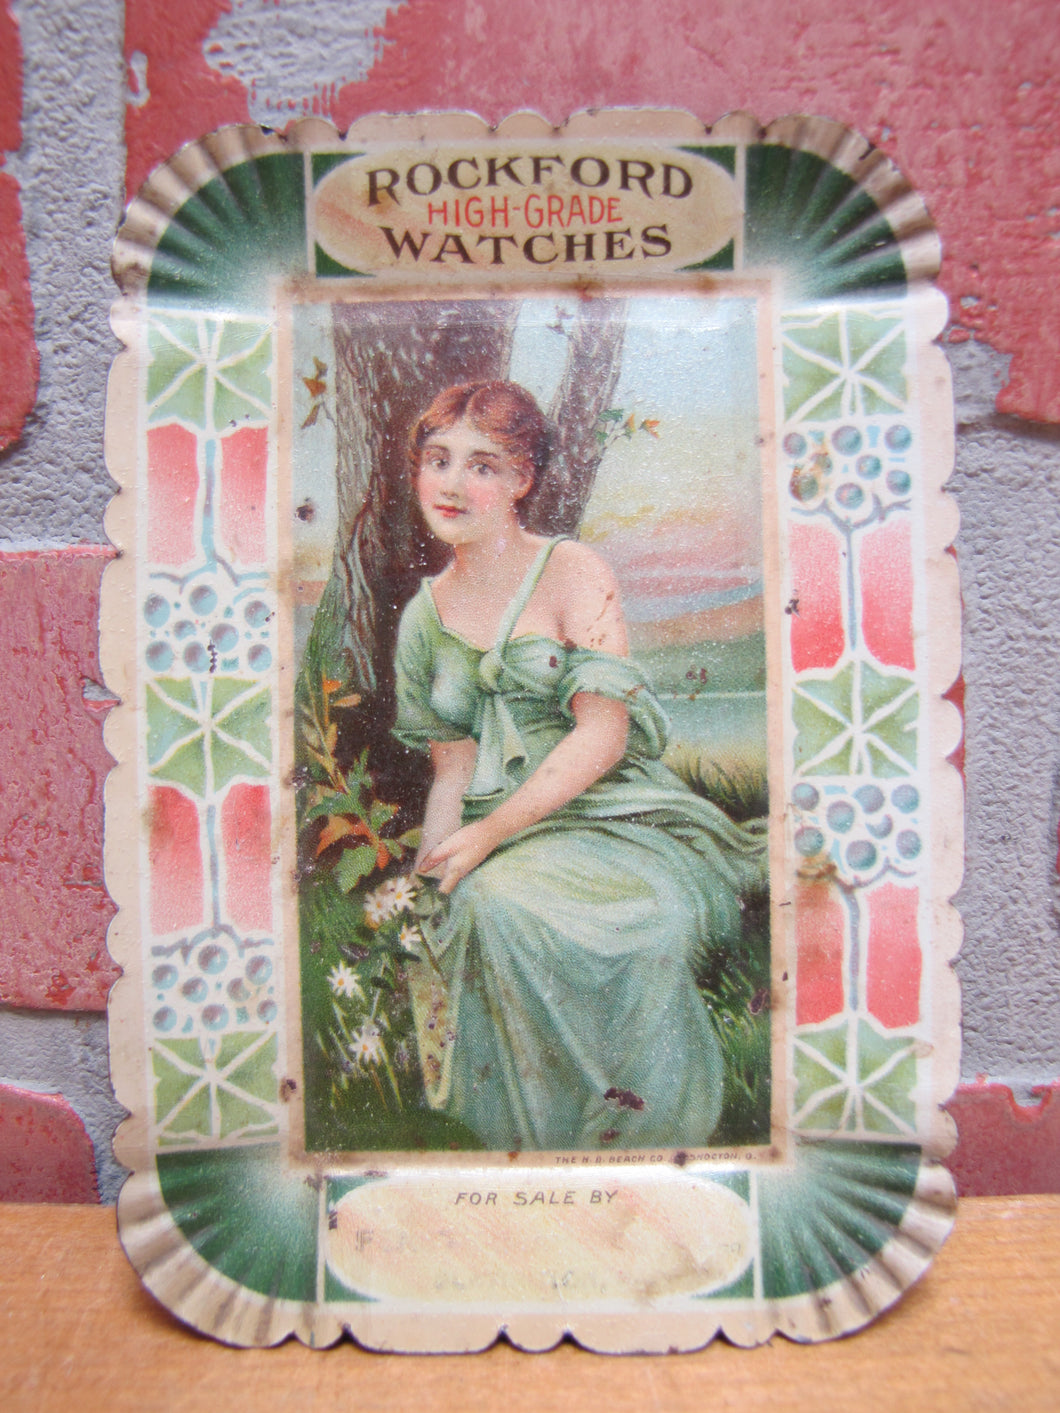 ROCKFORD WATCHES Antique Jewelry Advertising Tip Tray H D BEACH Coshocton Ohio